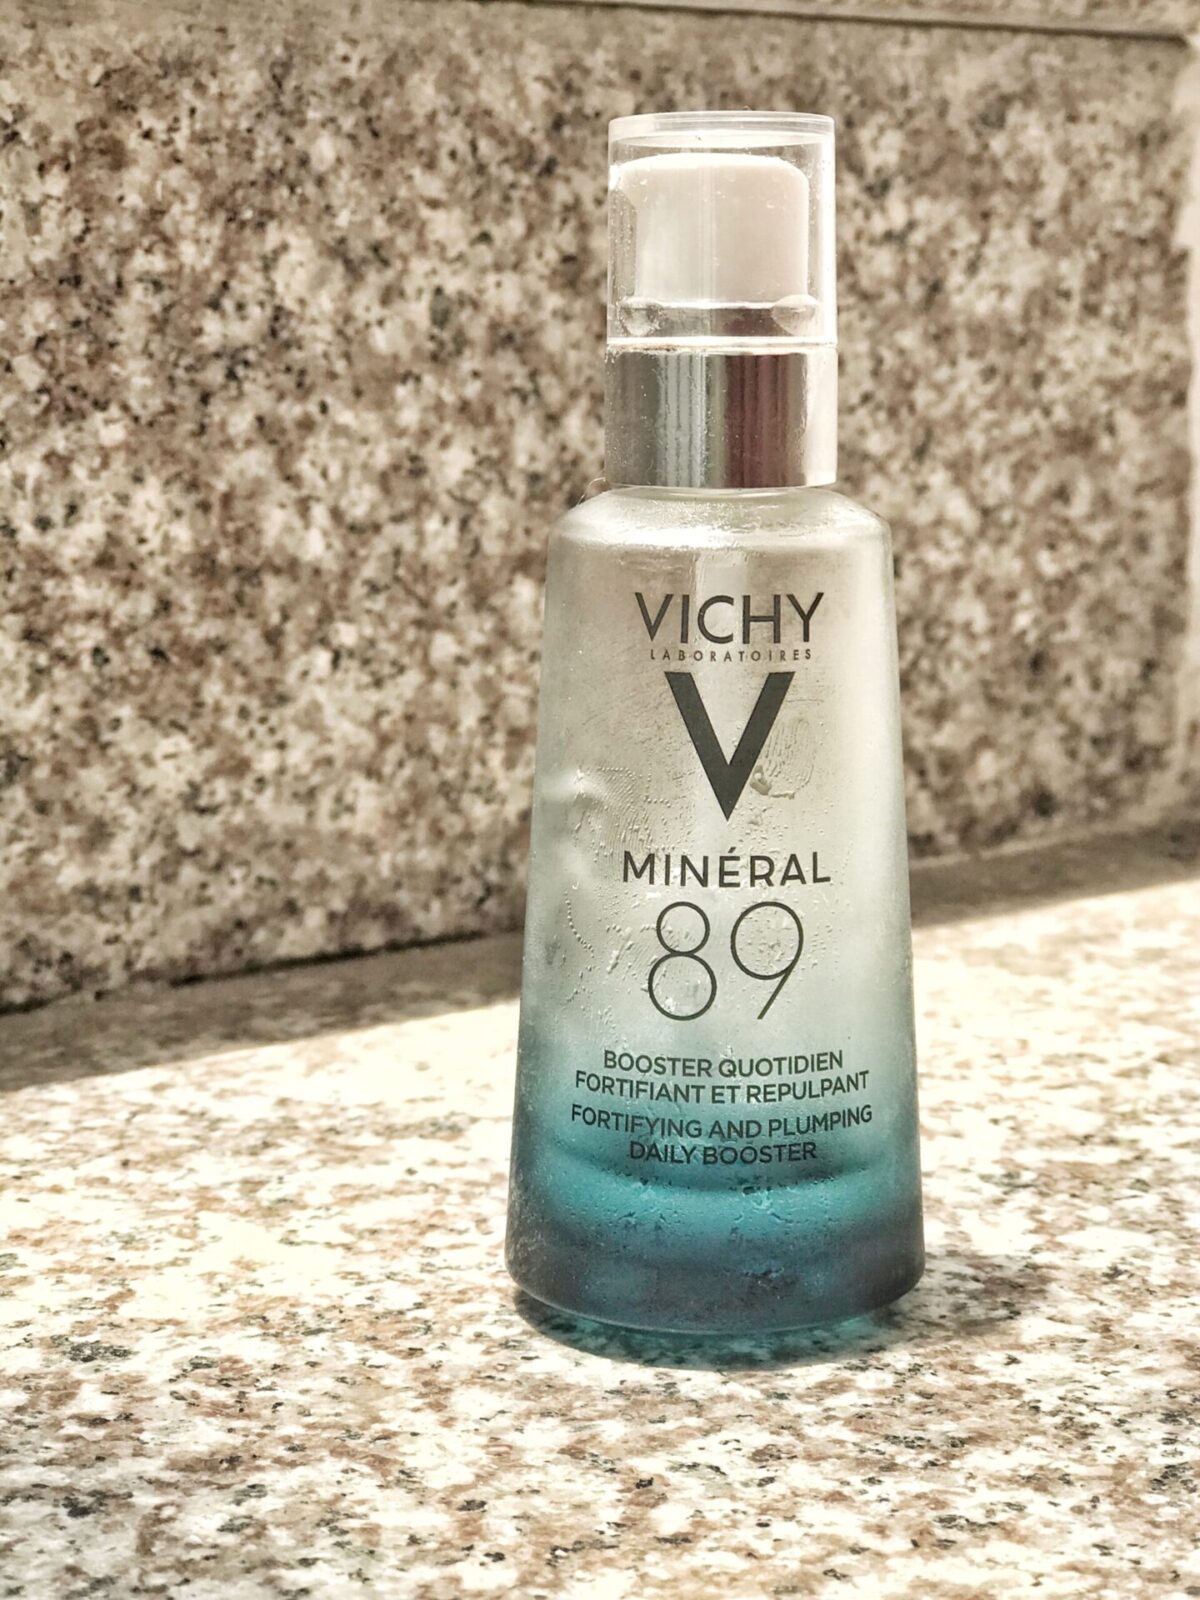 Review Dưỡng Chất Vichy Mineral 89 Booster 29